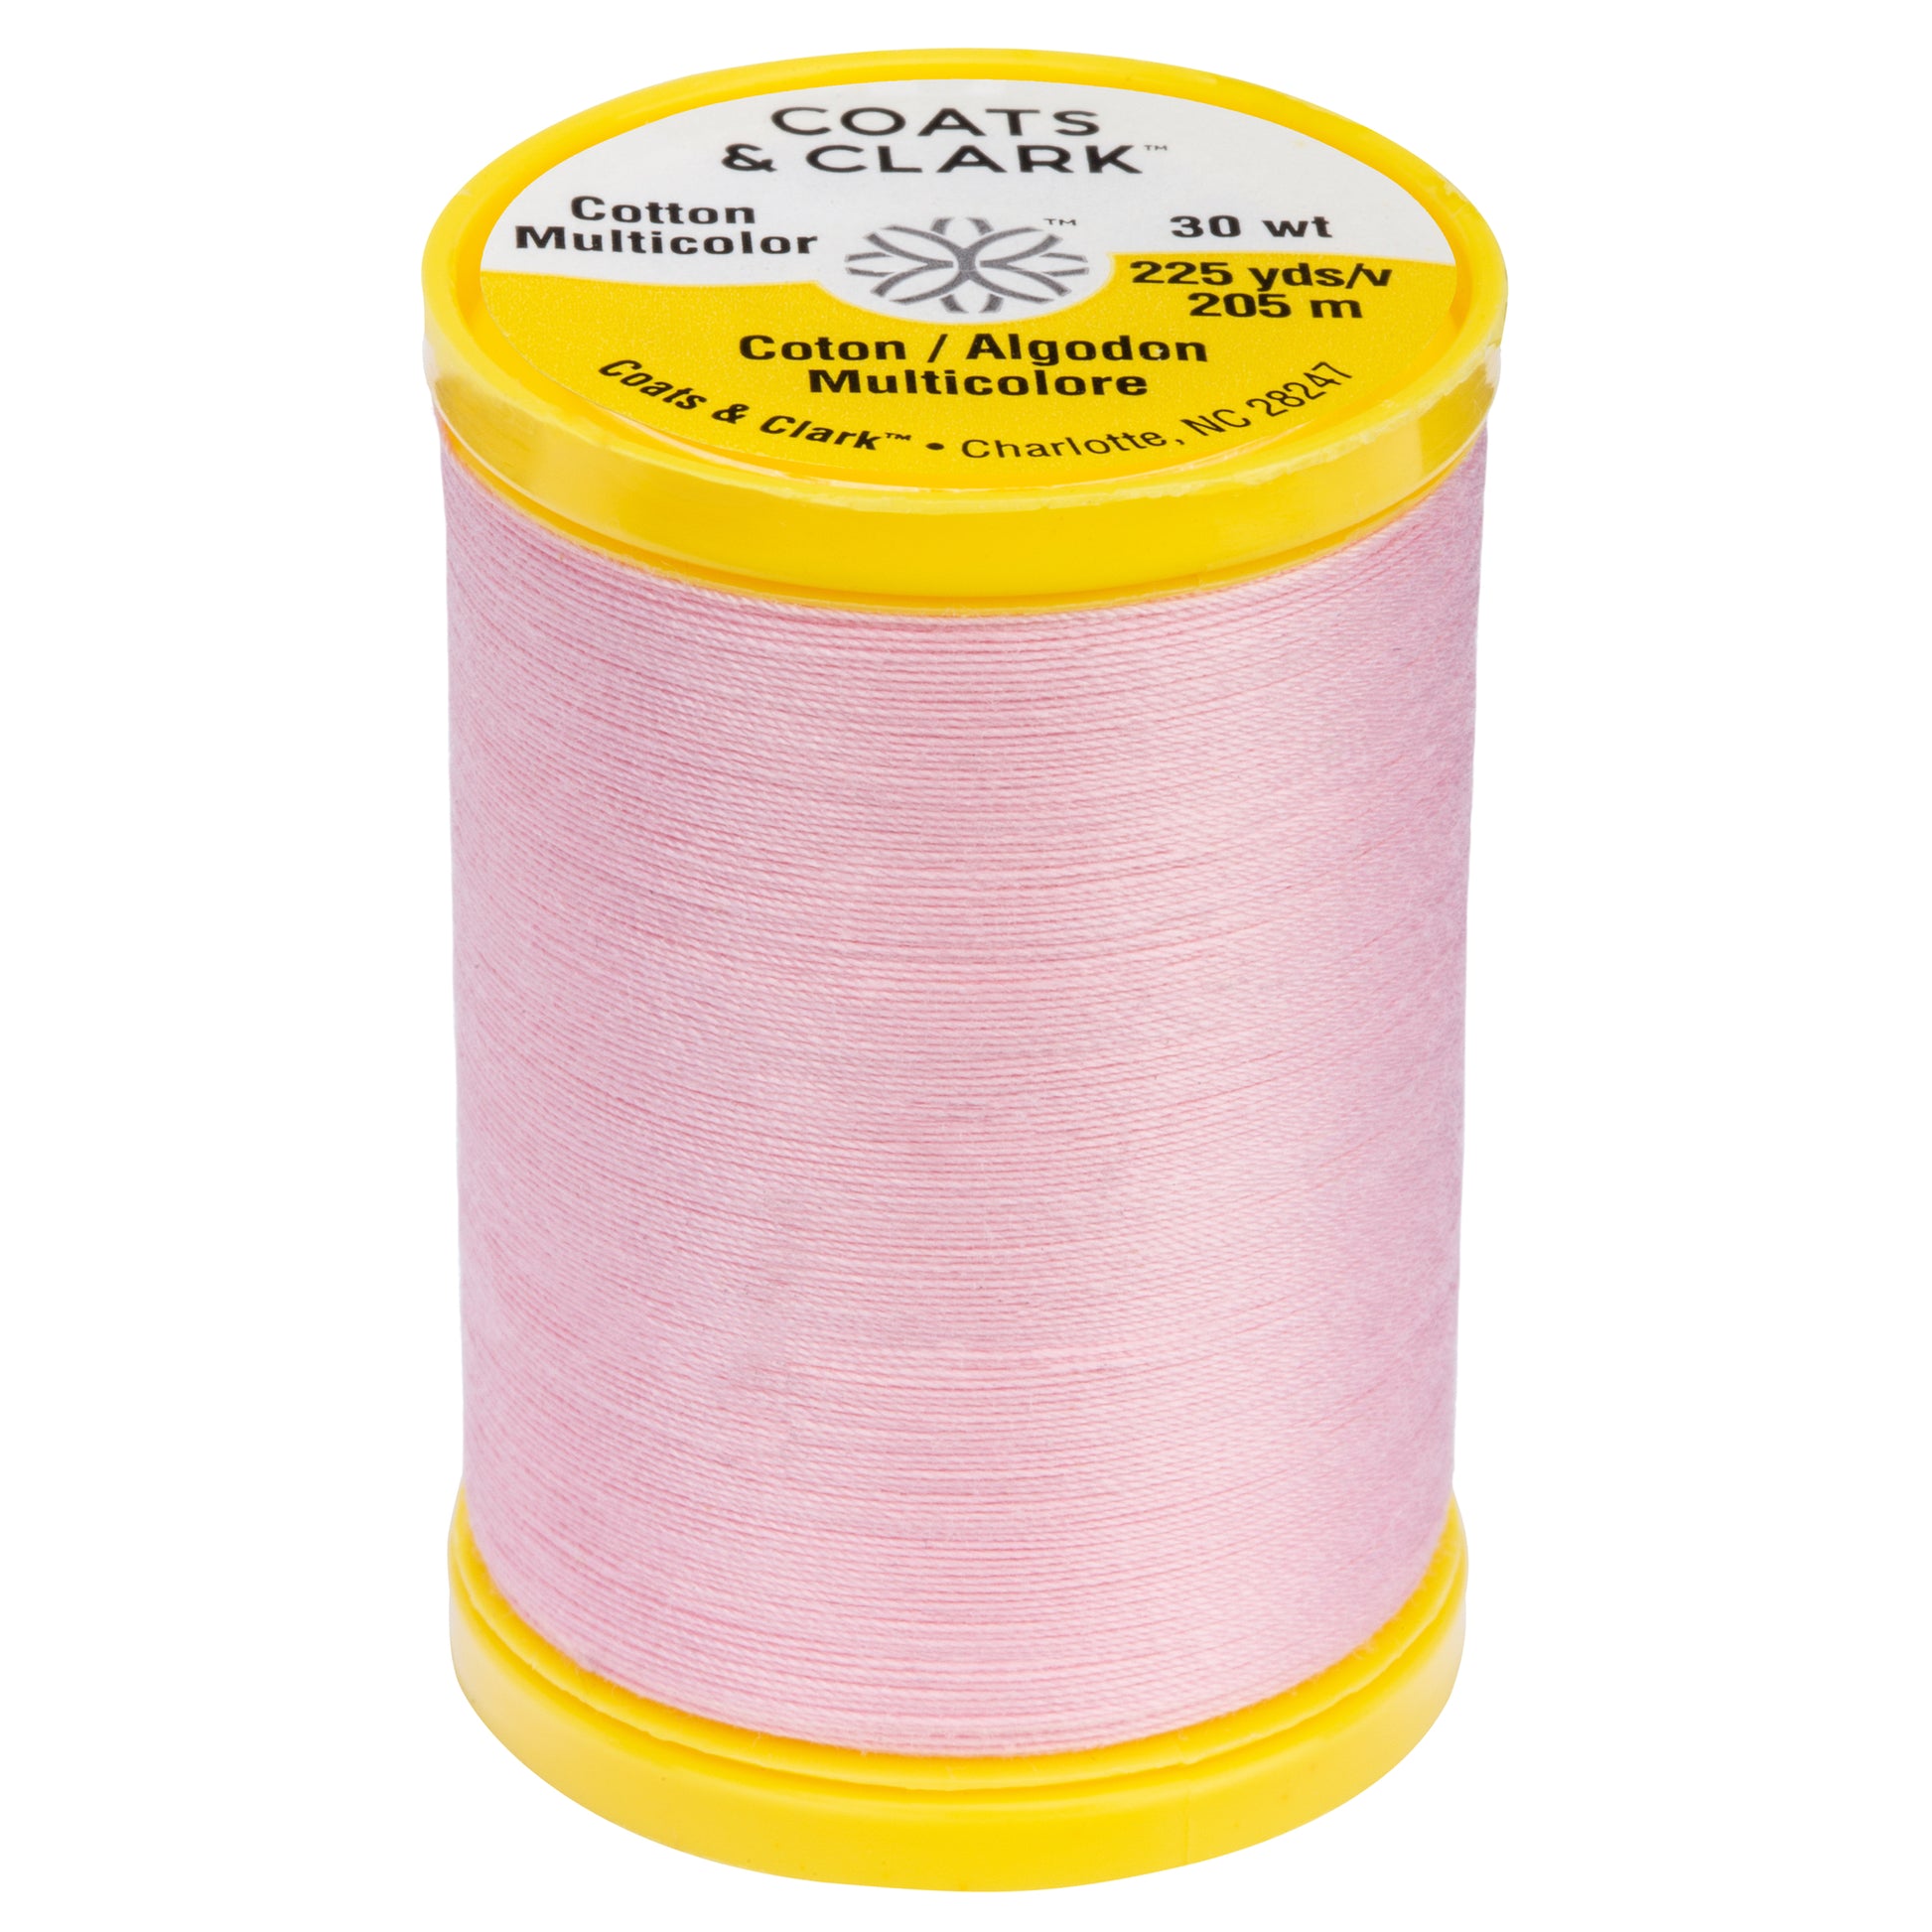 Coats & Clark Cotton All Purpose Sewing Thread (225 Yards)